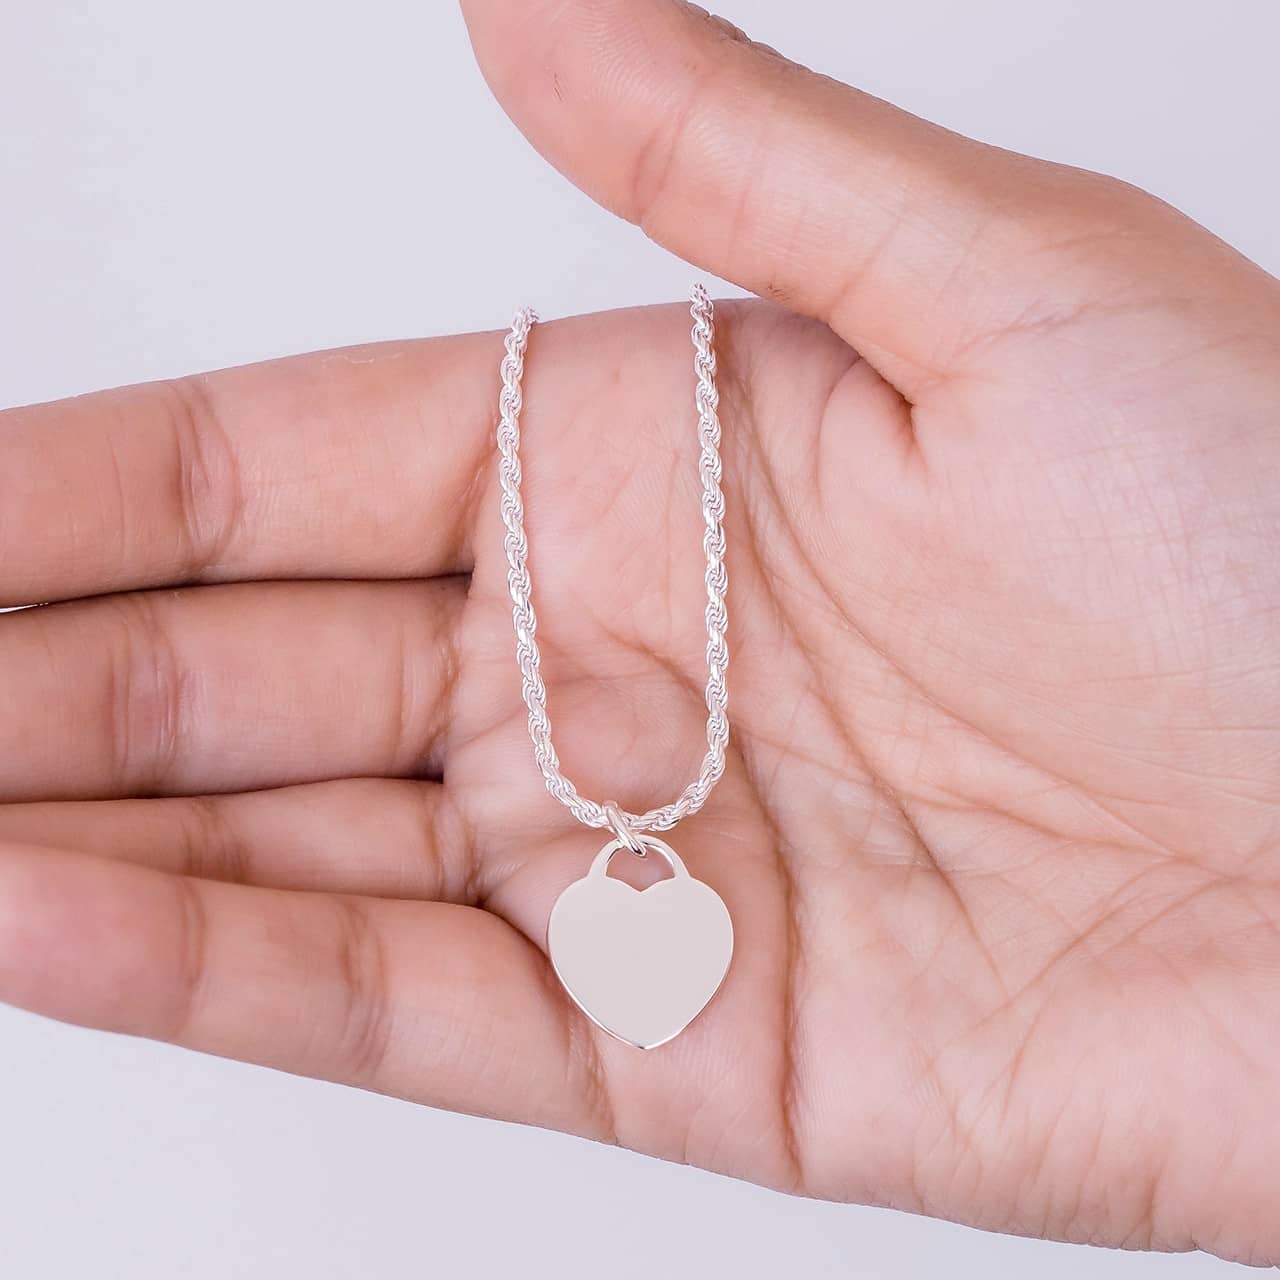 Silver heart tag pendant and rope bracelet